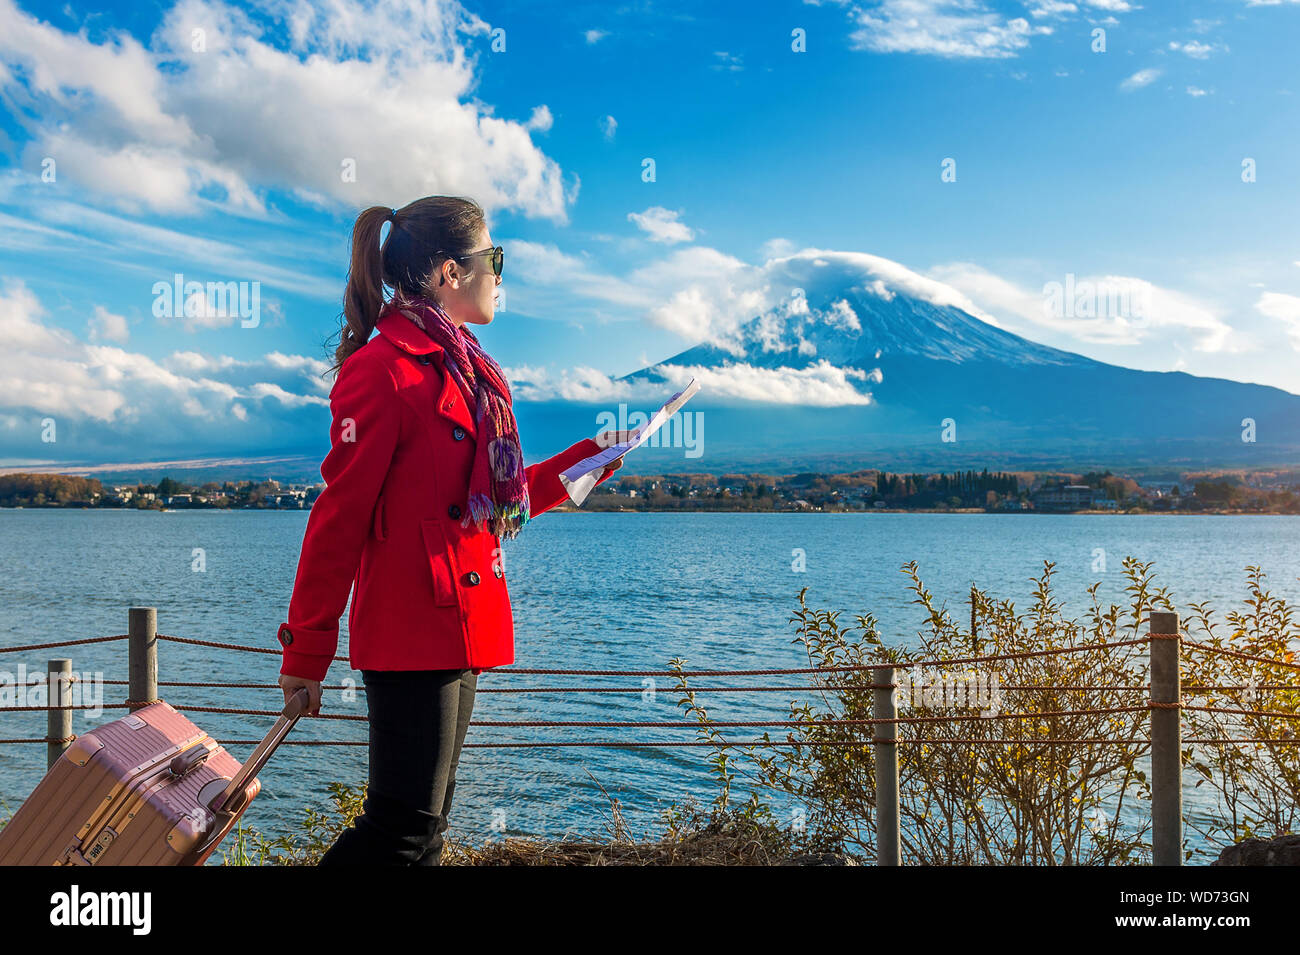 Young Woman With Luggage Standing By Lake Kawaguchi Holding Map Stock Photo